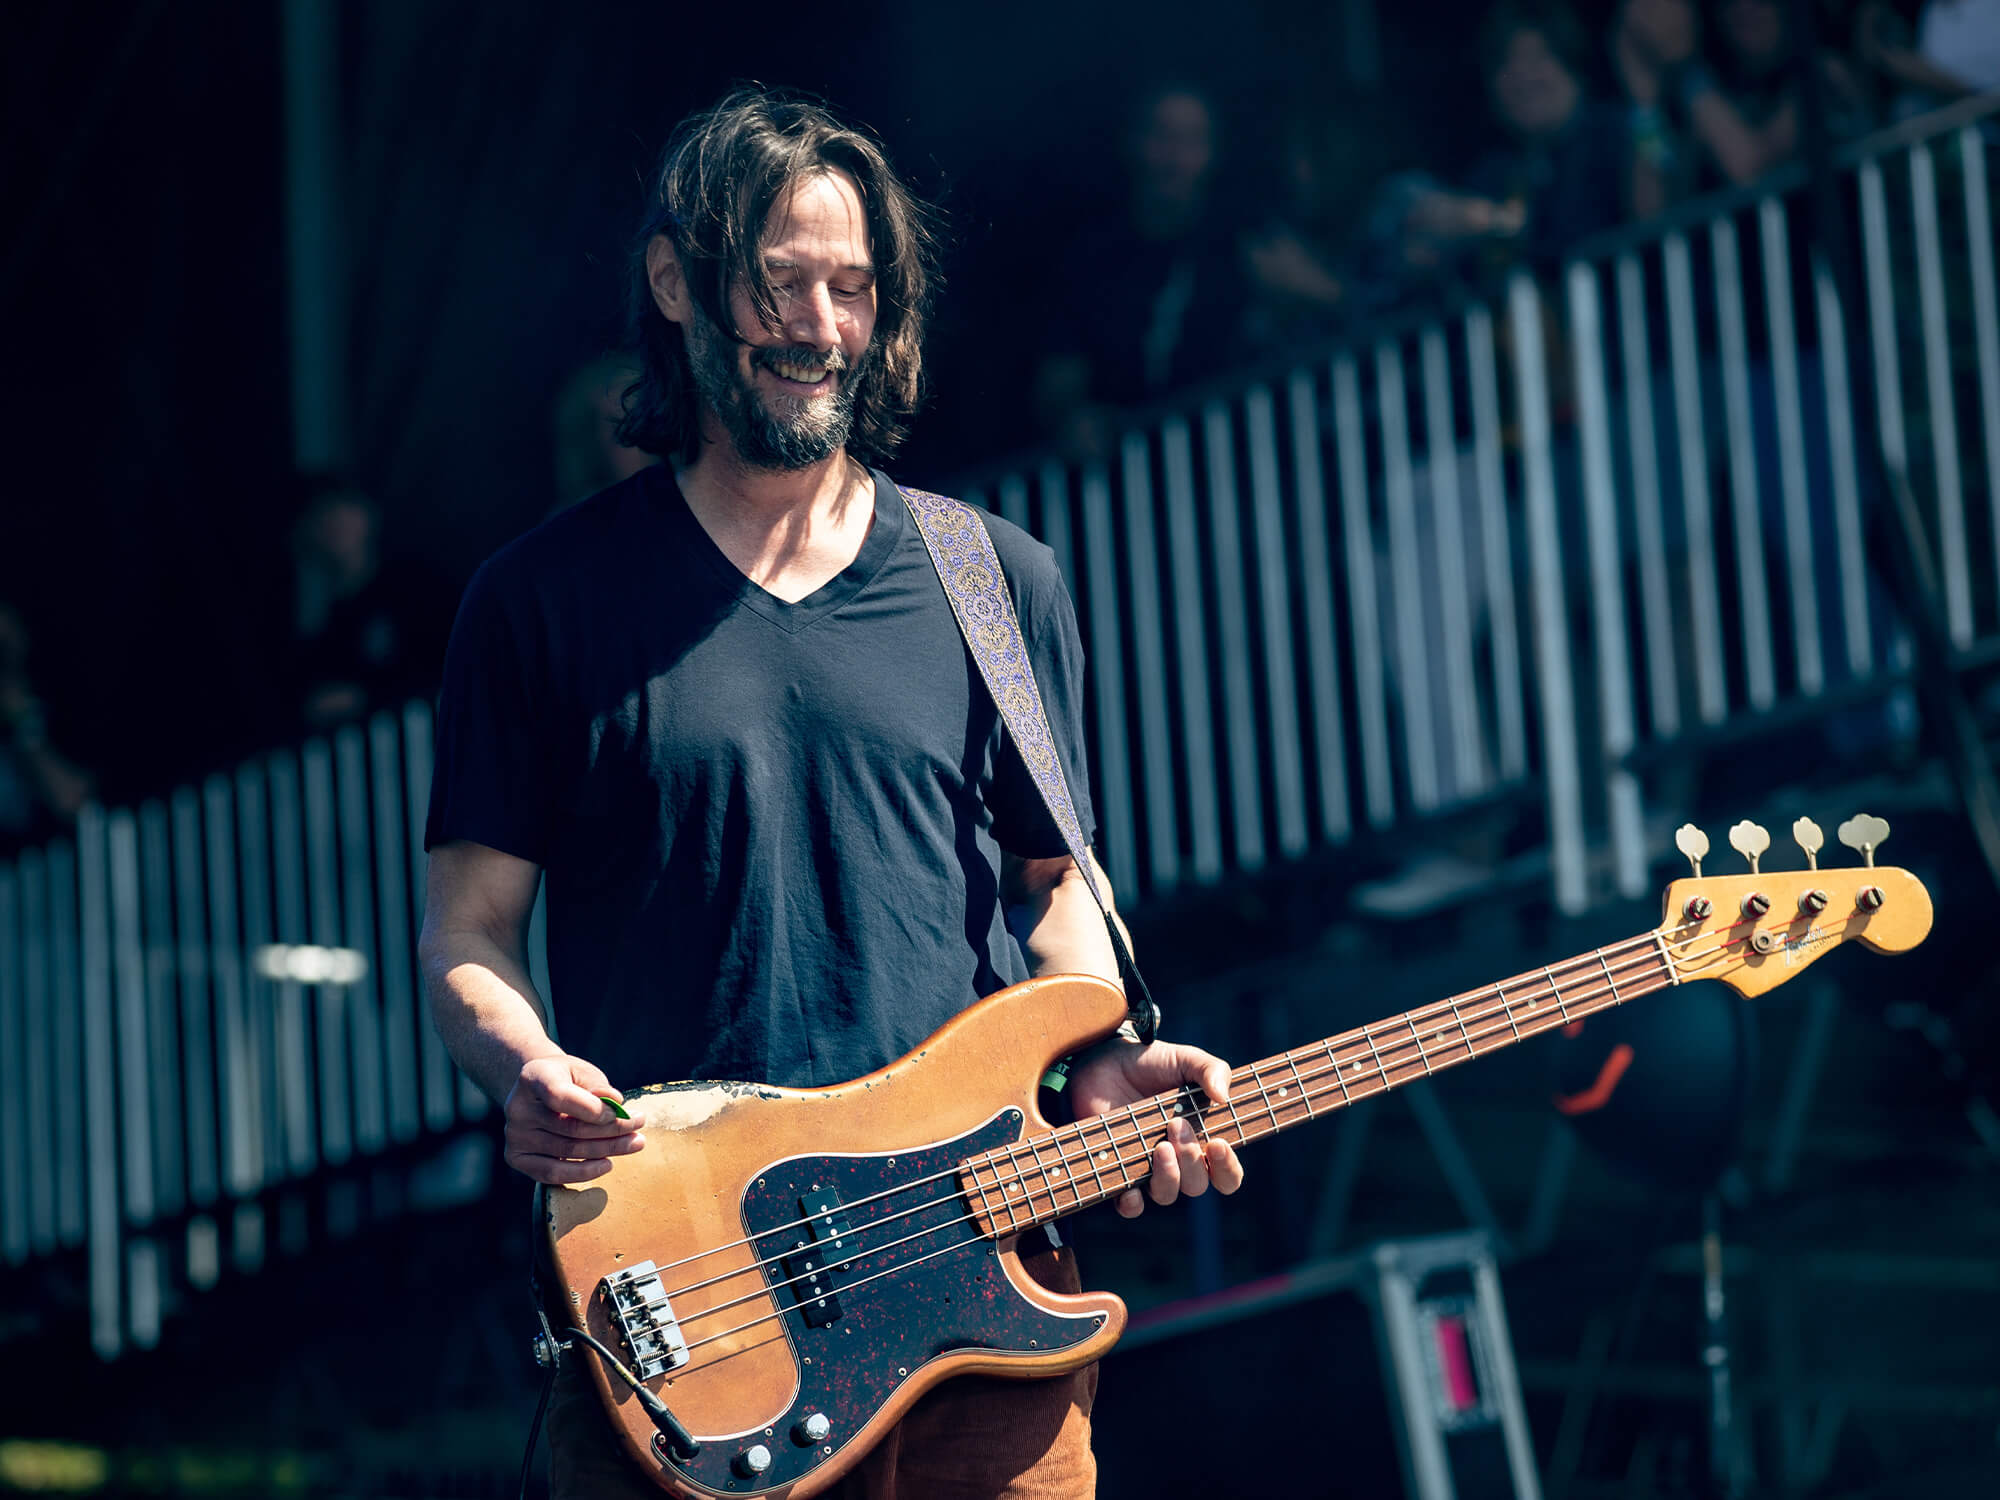 Keanu Reeves on stage holding his bass guitar. He's looking down at it at smiling.